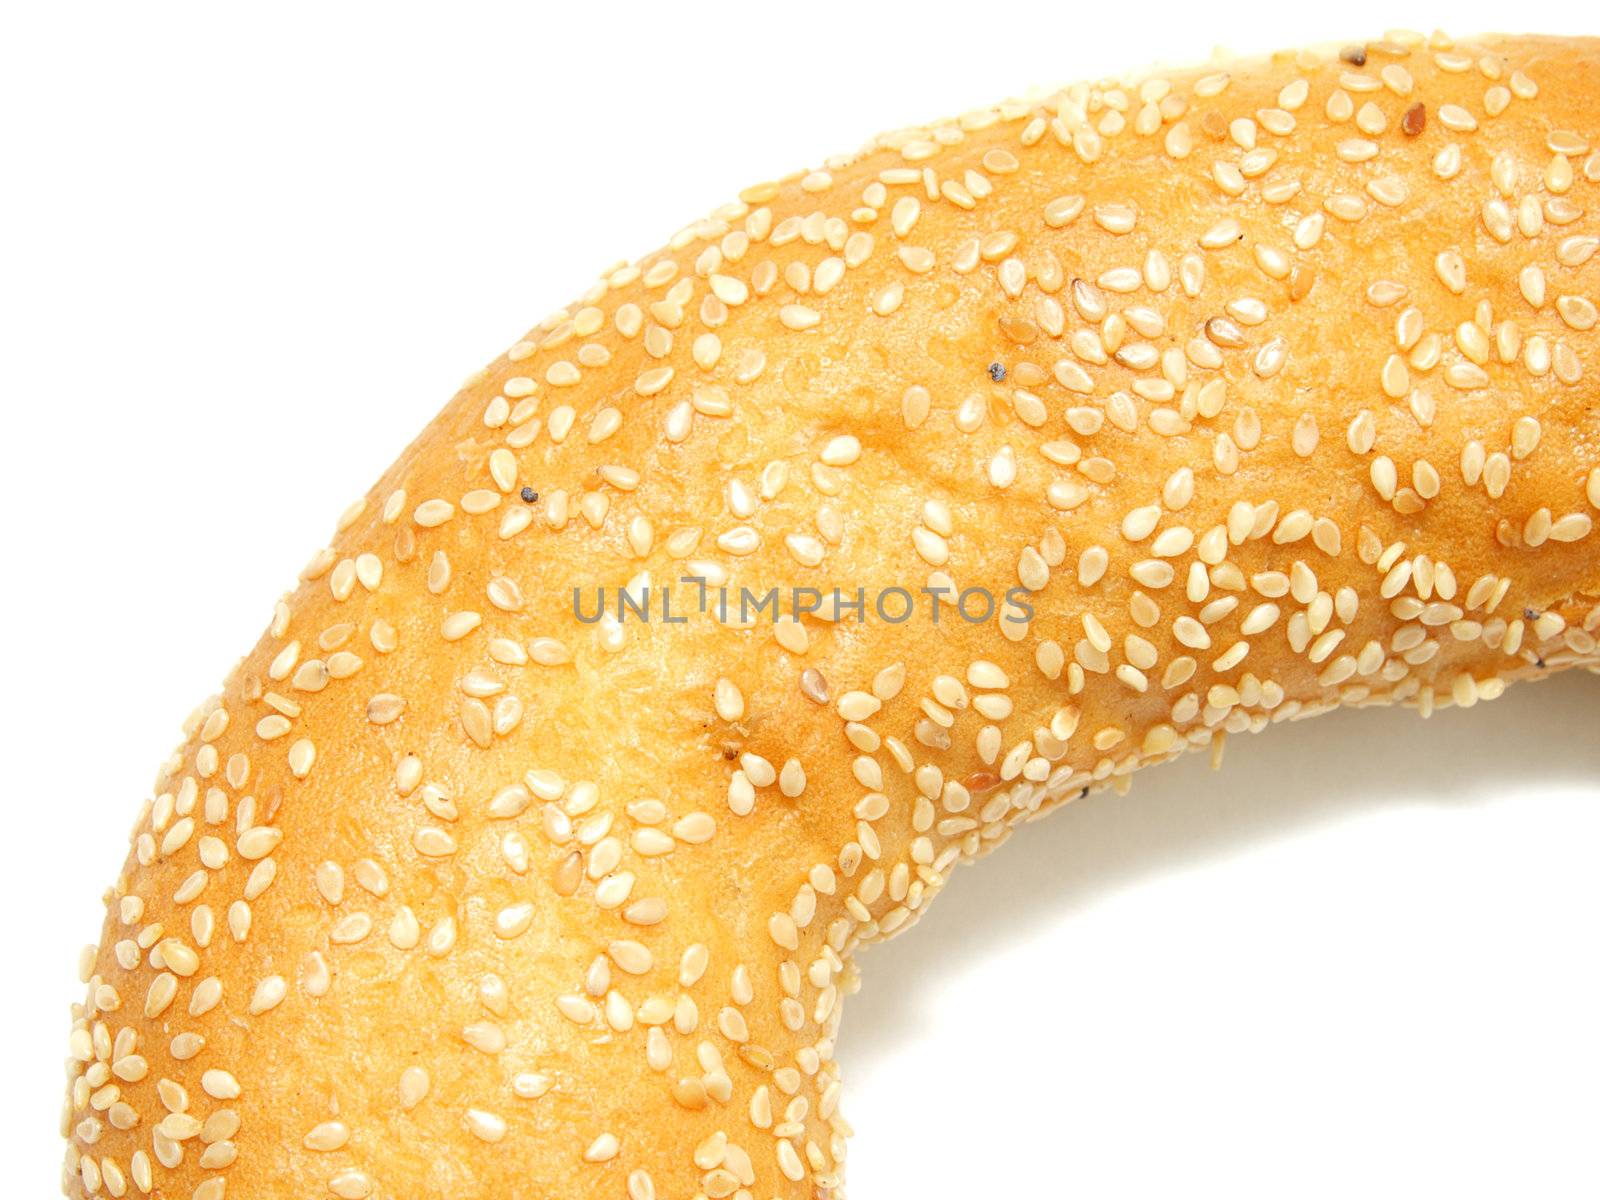 A part of bagel with sesame seeds on white by pulen